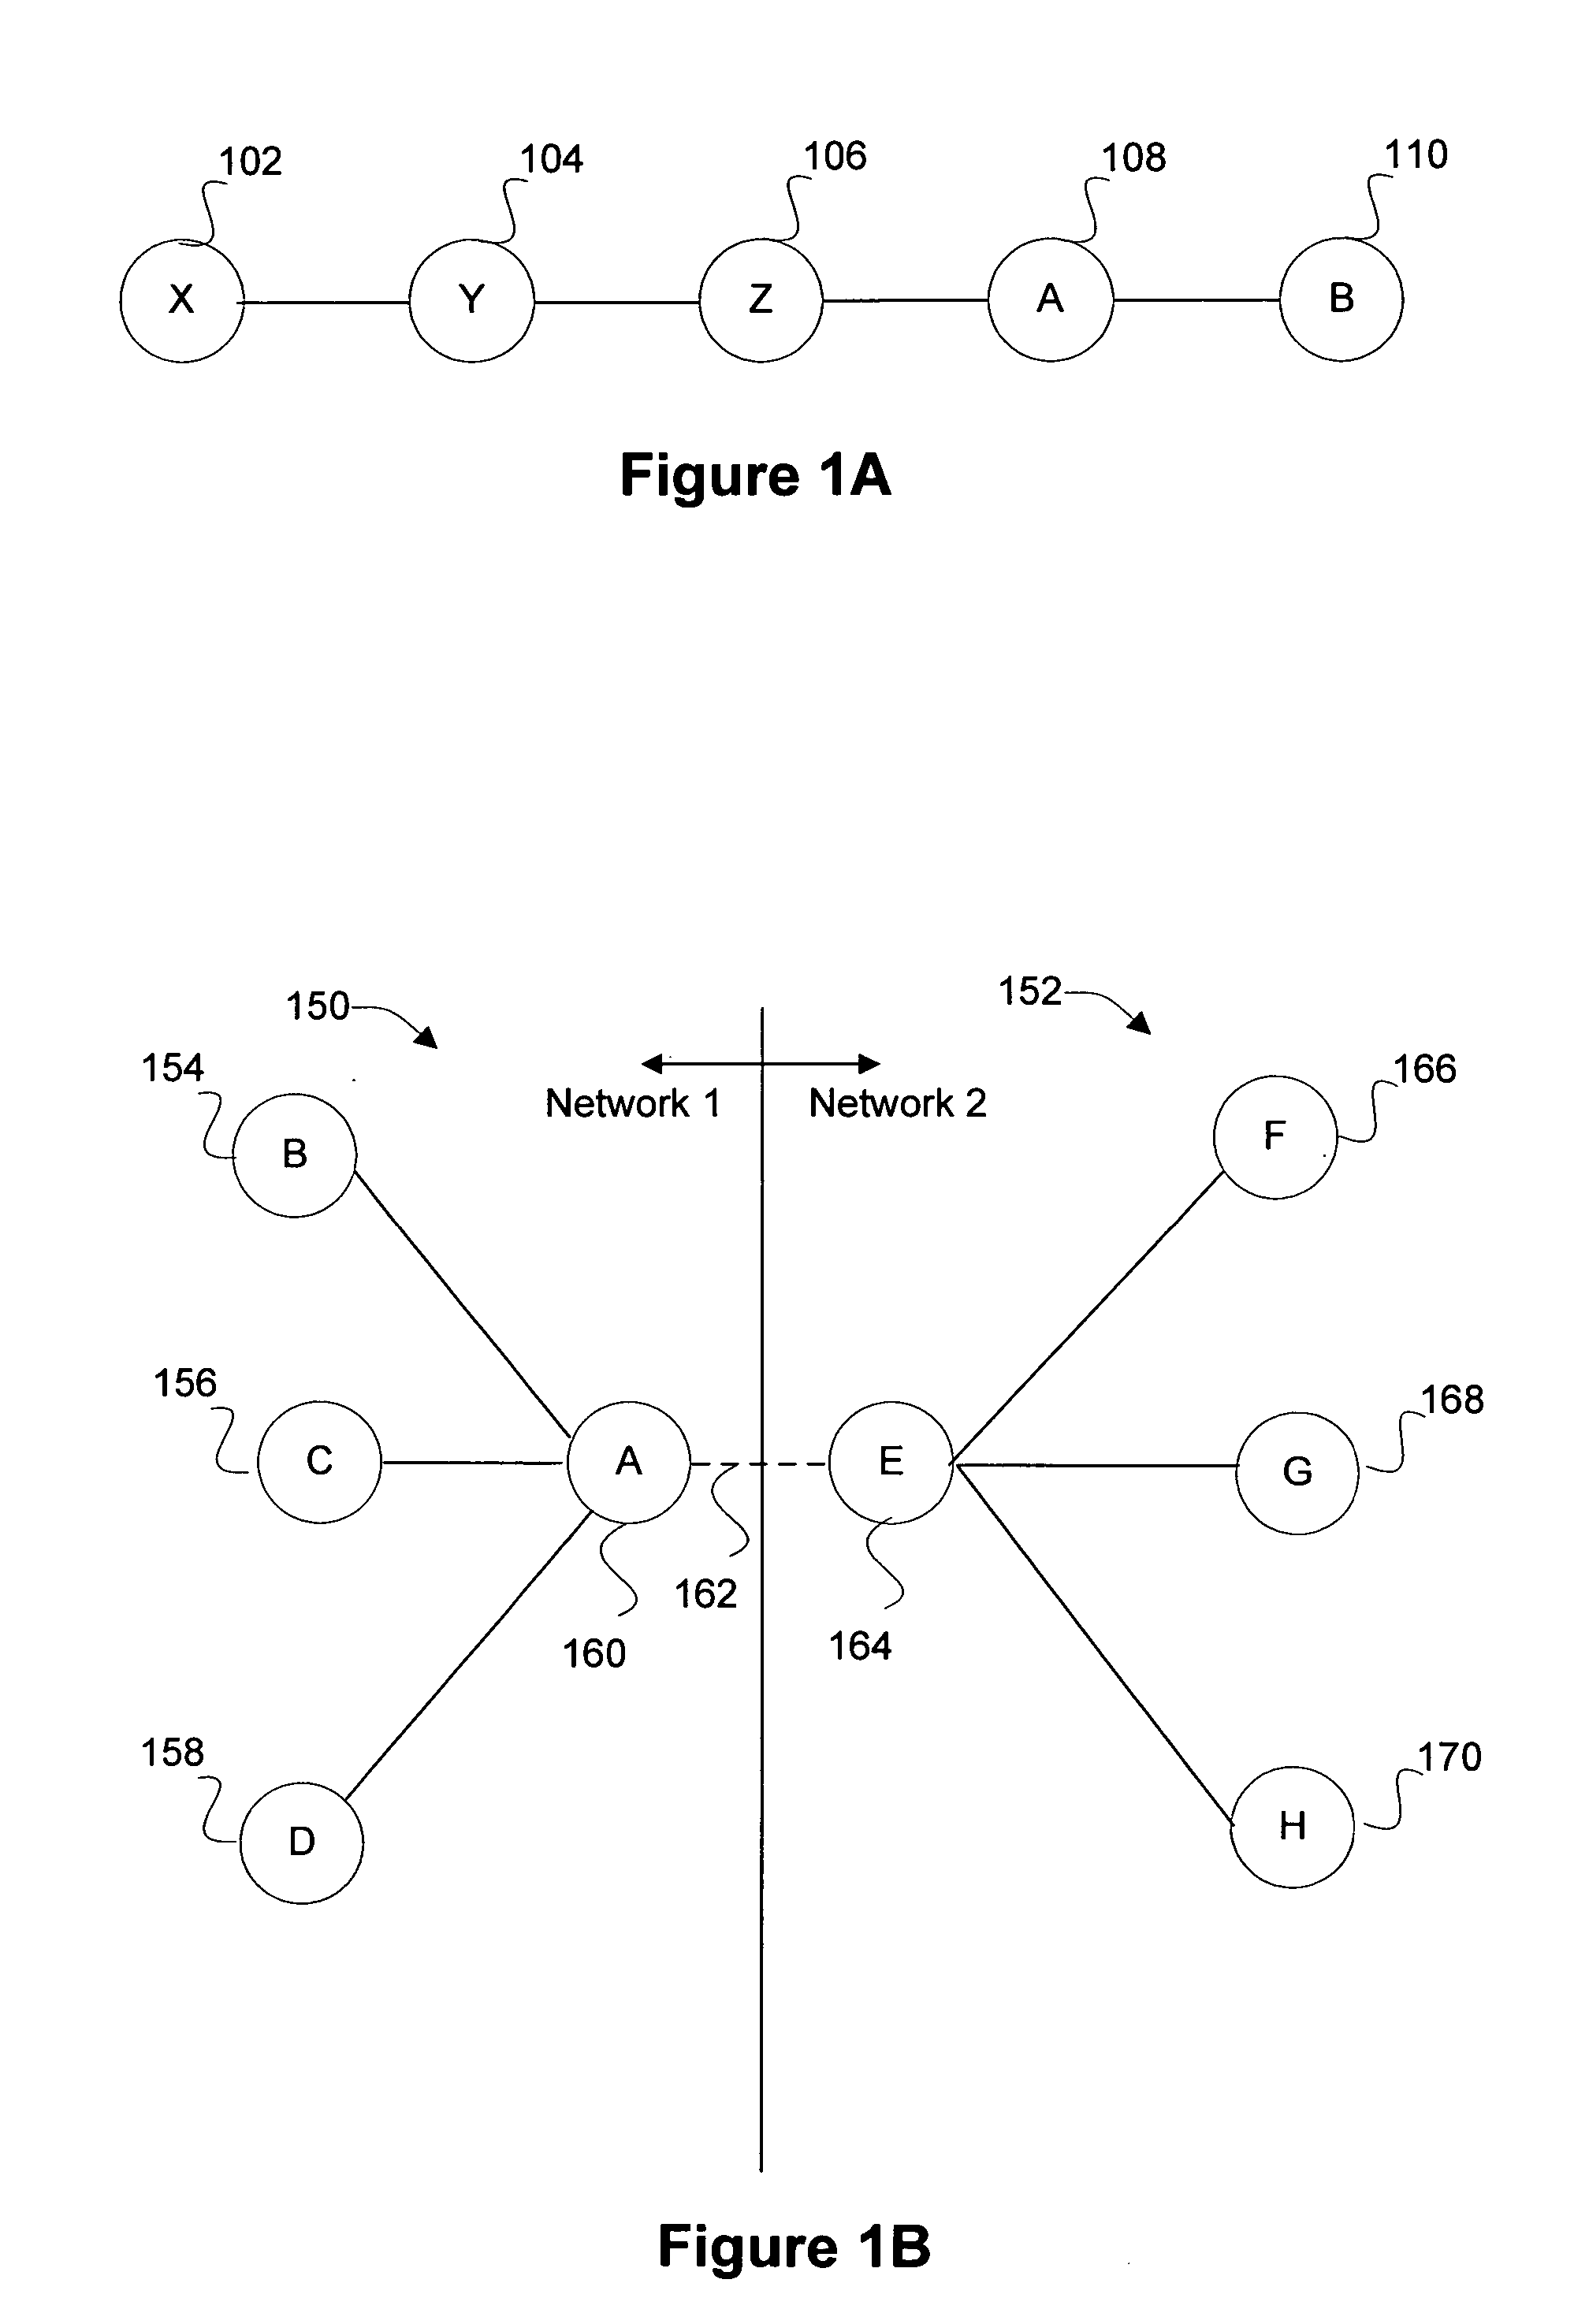 Method and apparatus for flooding link state packets to achieve faster convergence